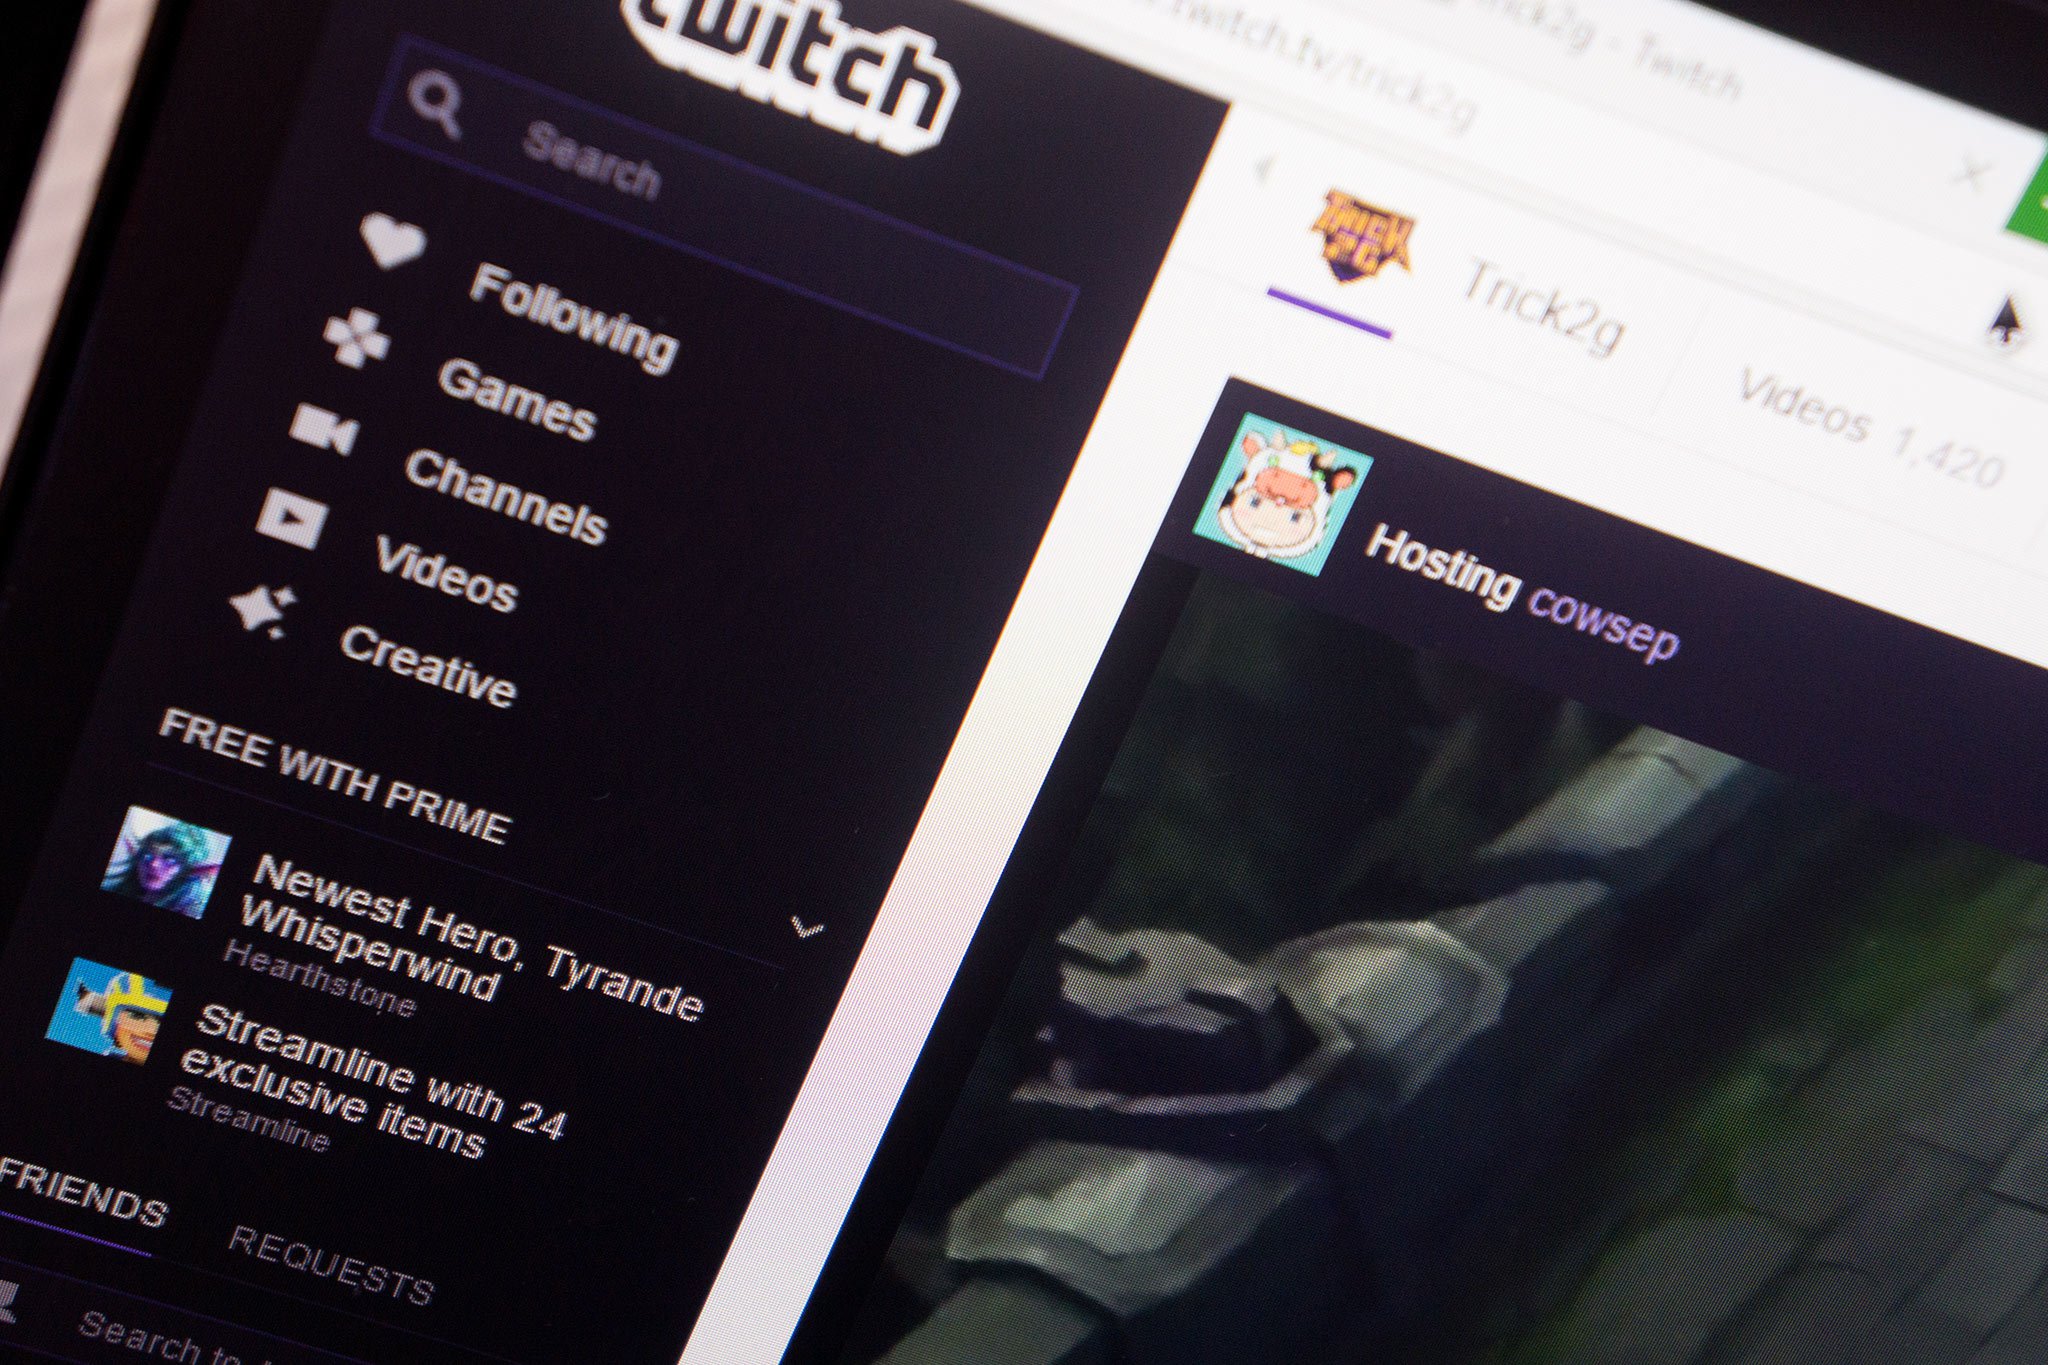 What is Twitch Prime and how do I get it?